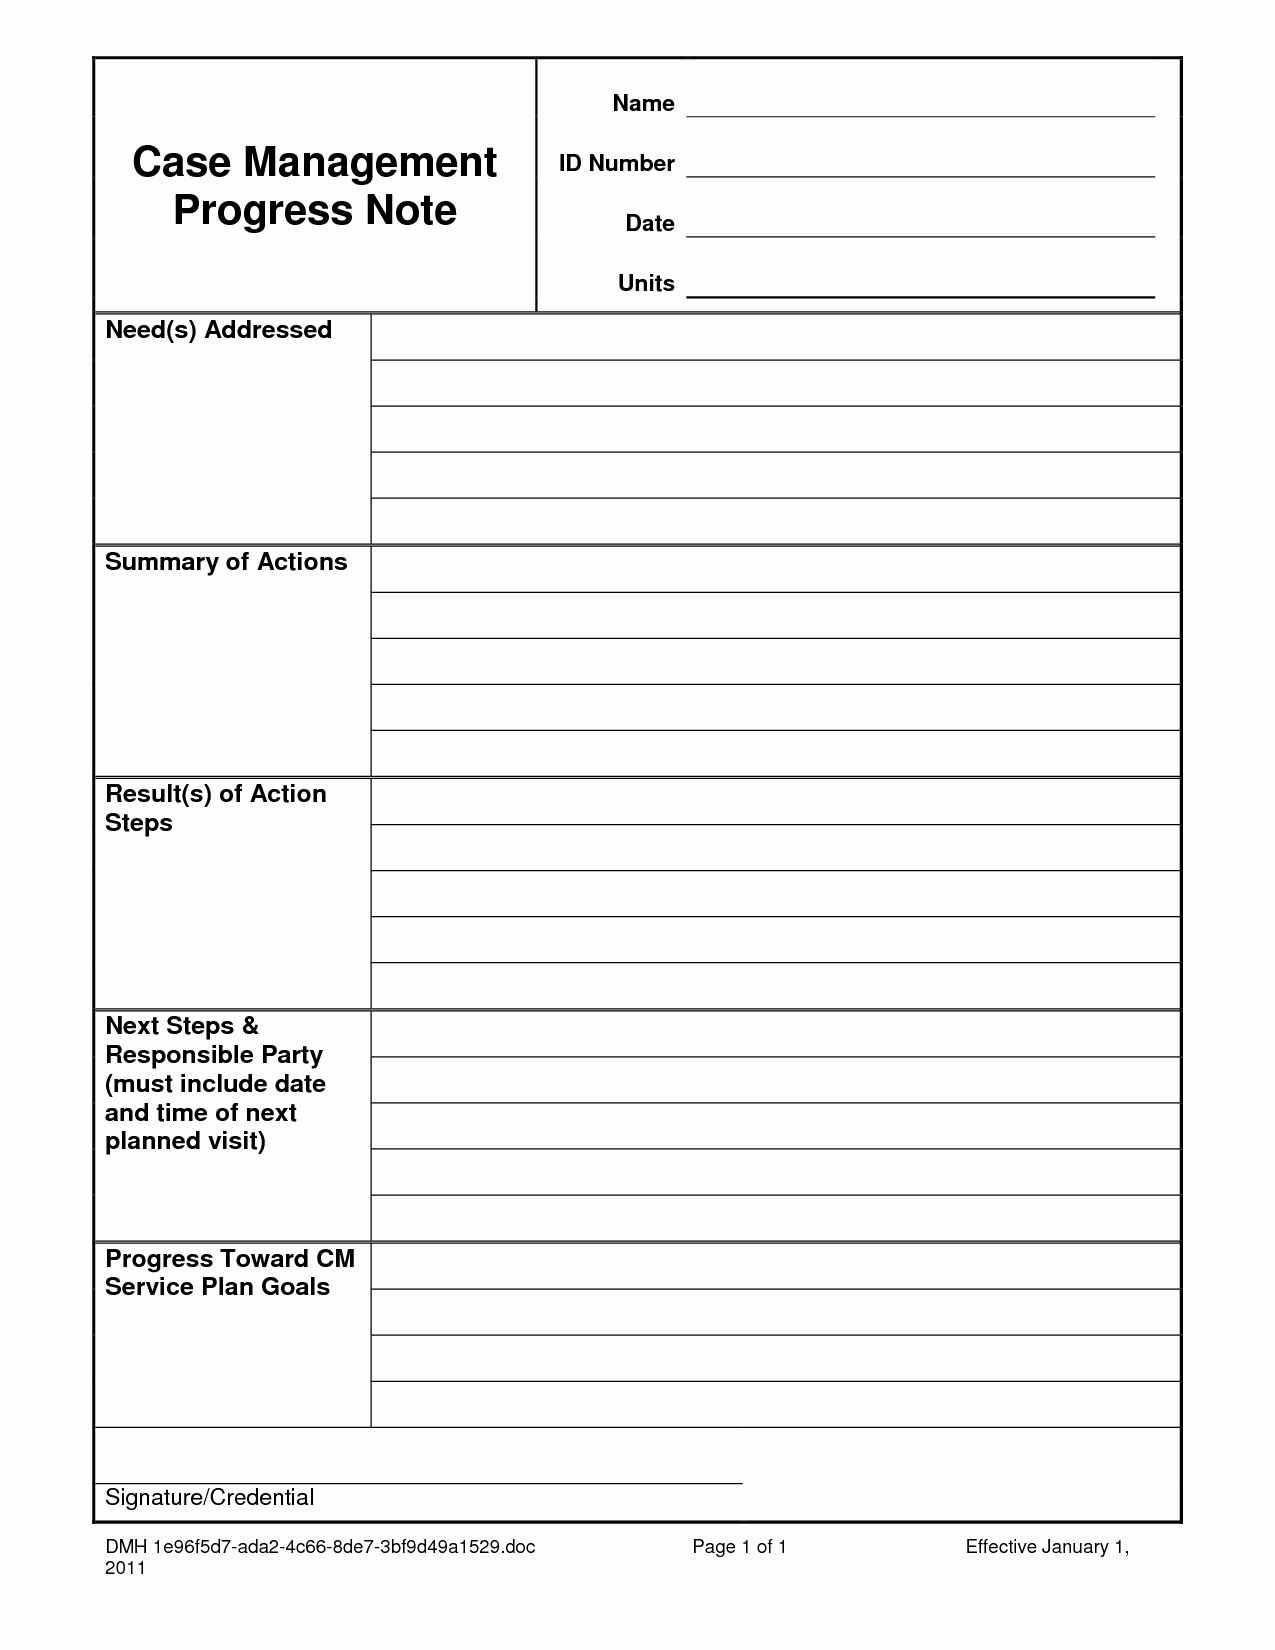 Case Note Template social Work Inspirational Case Notes Template